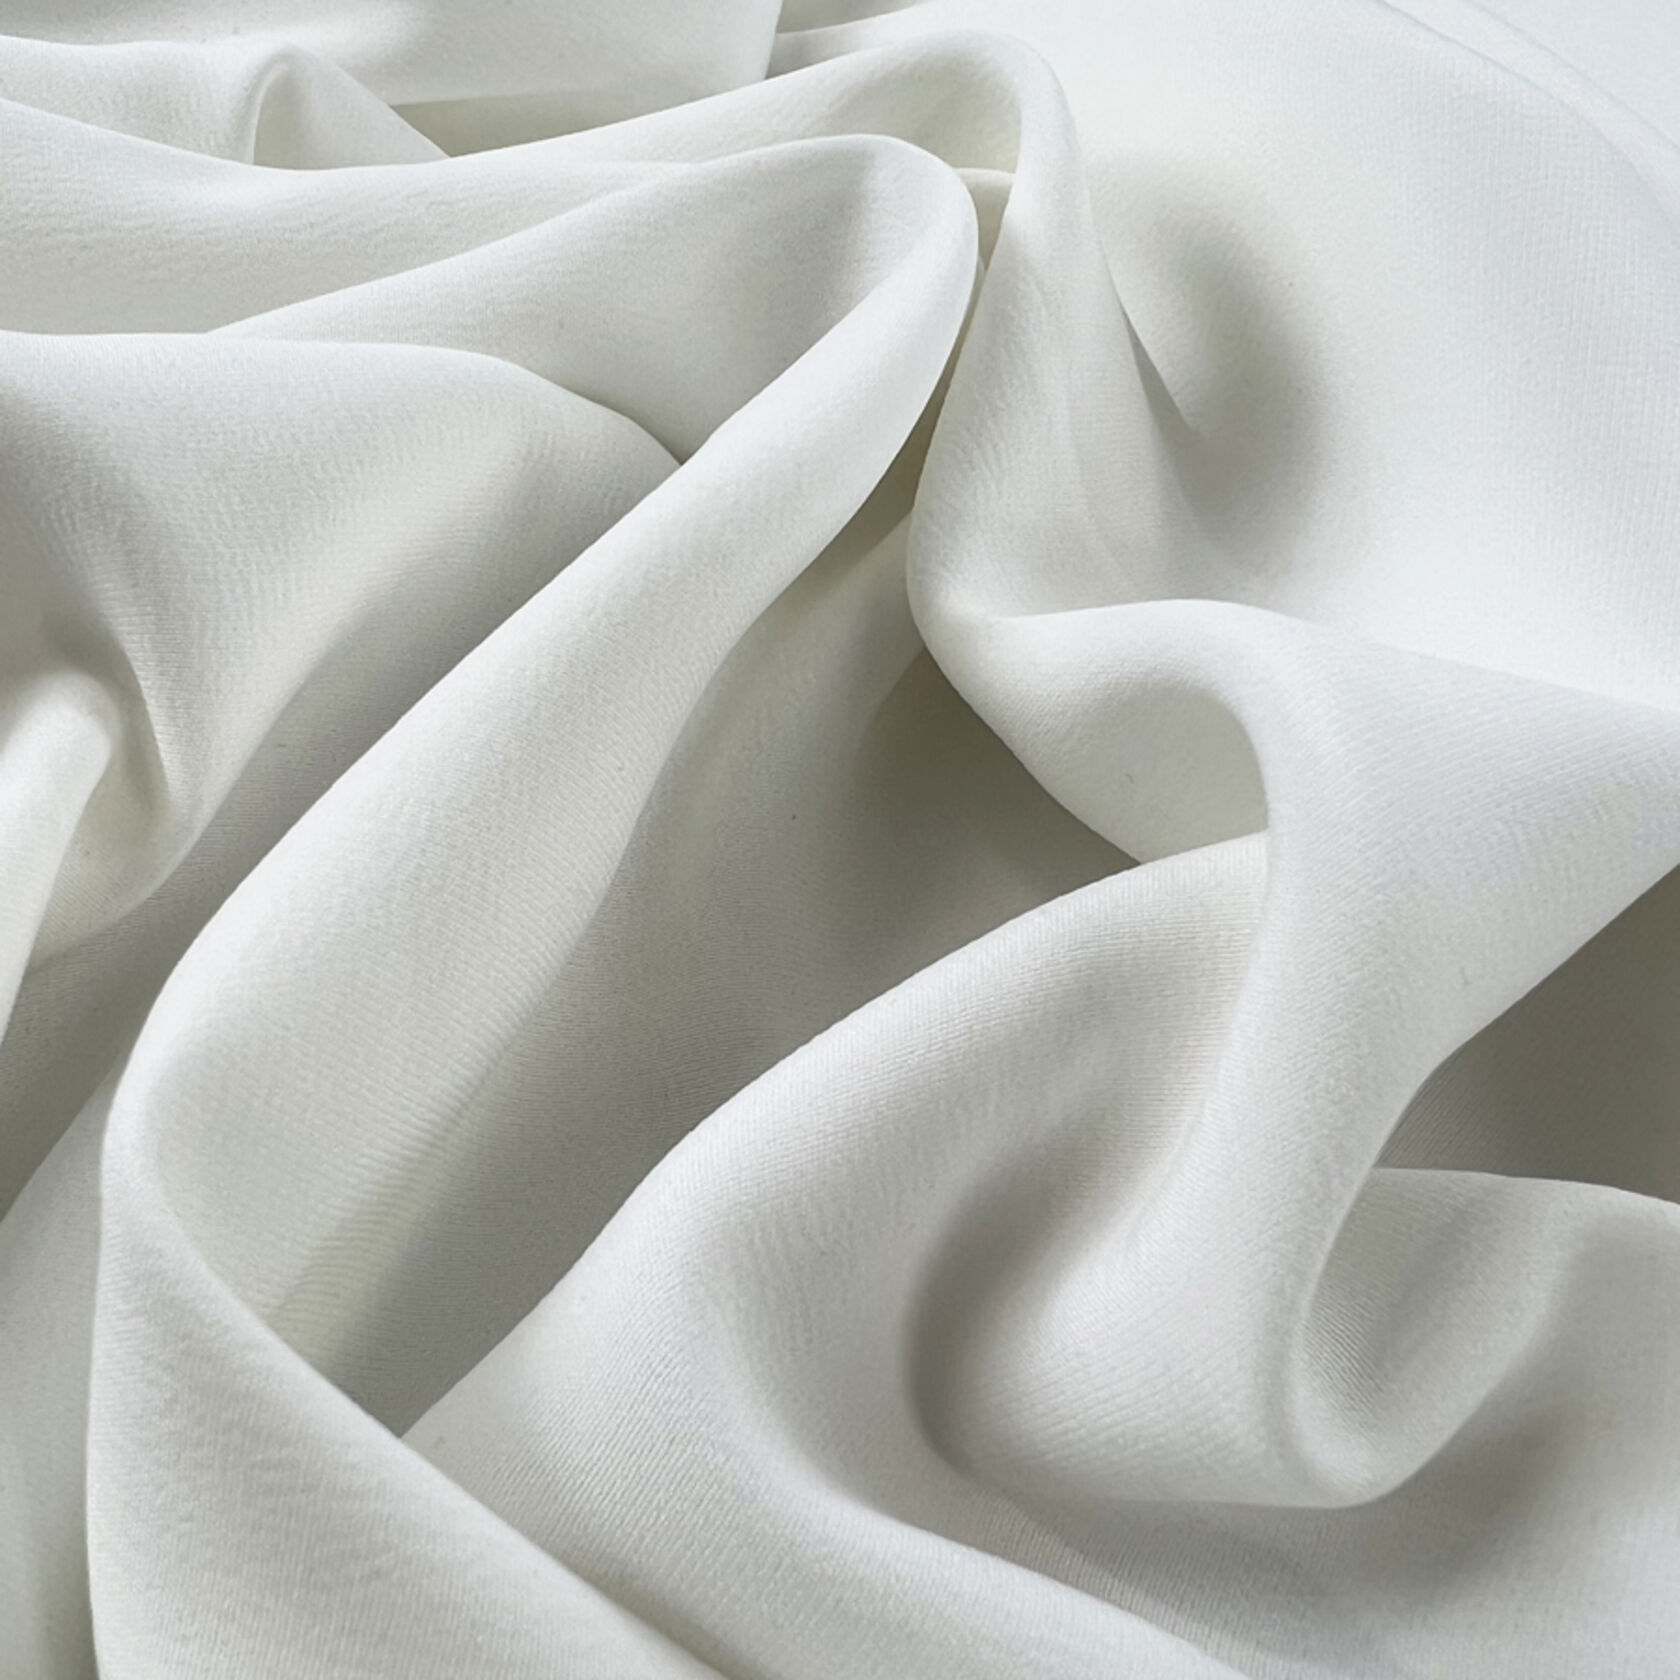 Recycled Polyester Spandex Crepe Dress Fabric - Ivory Sands